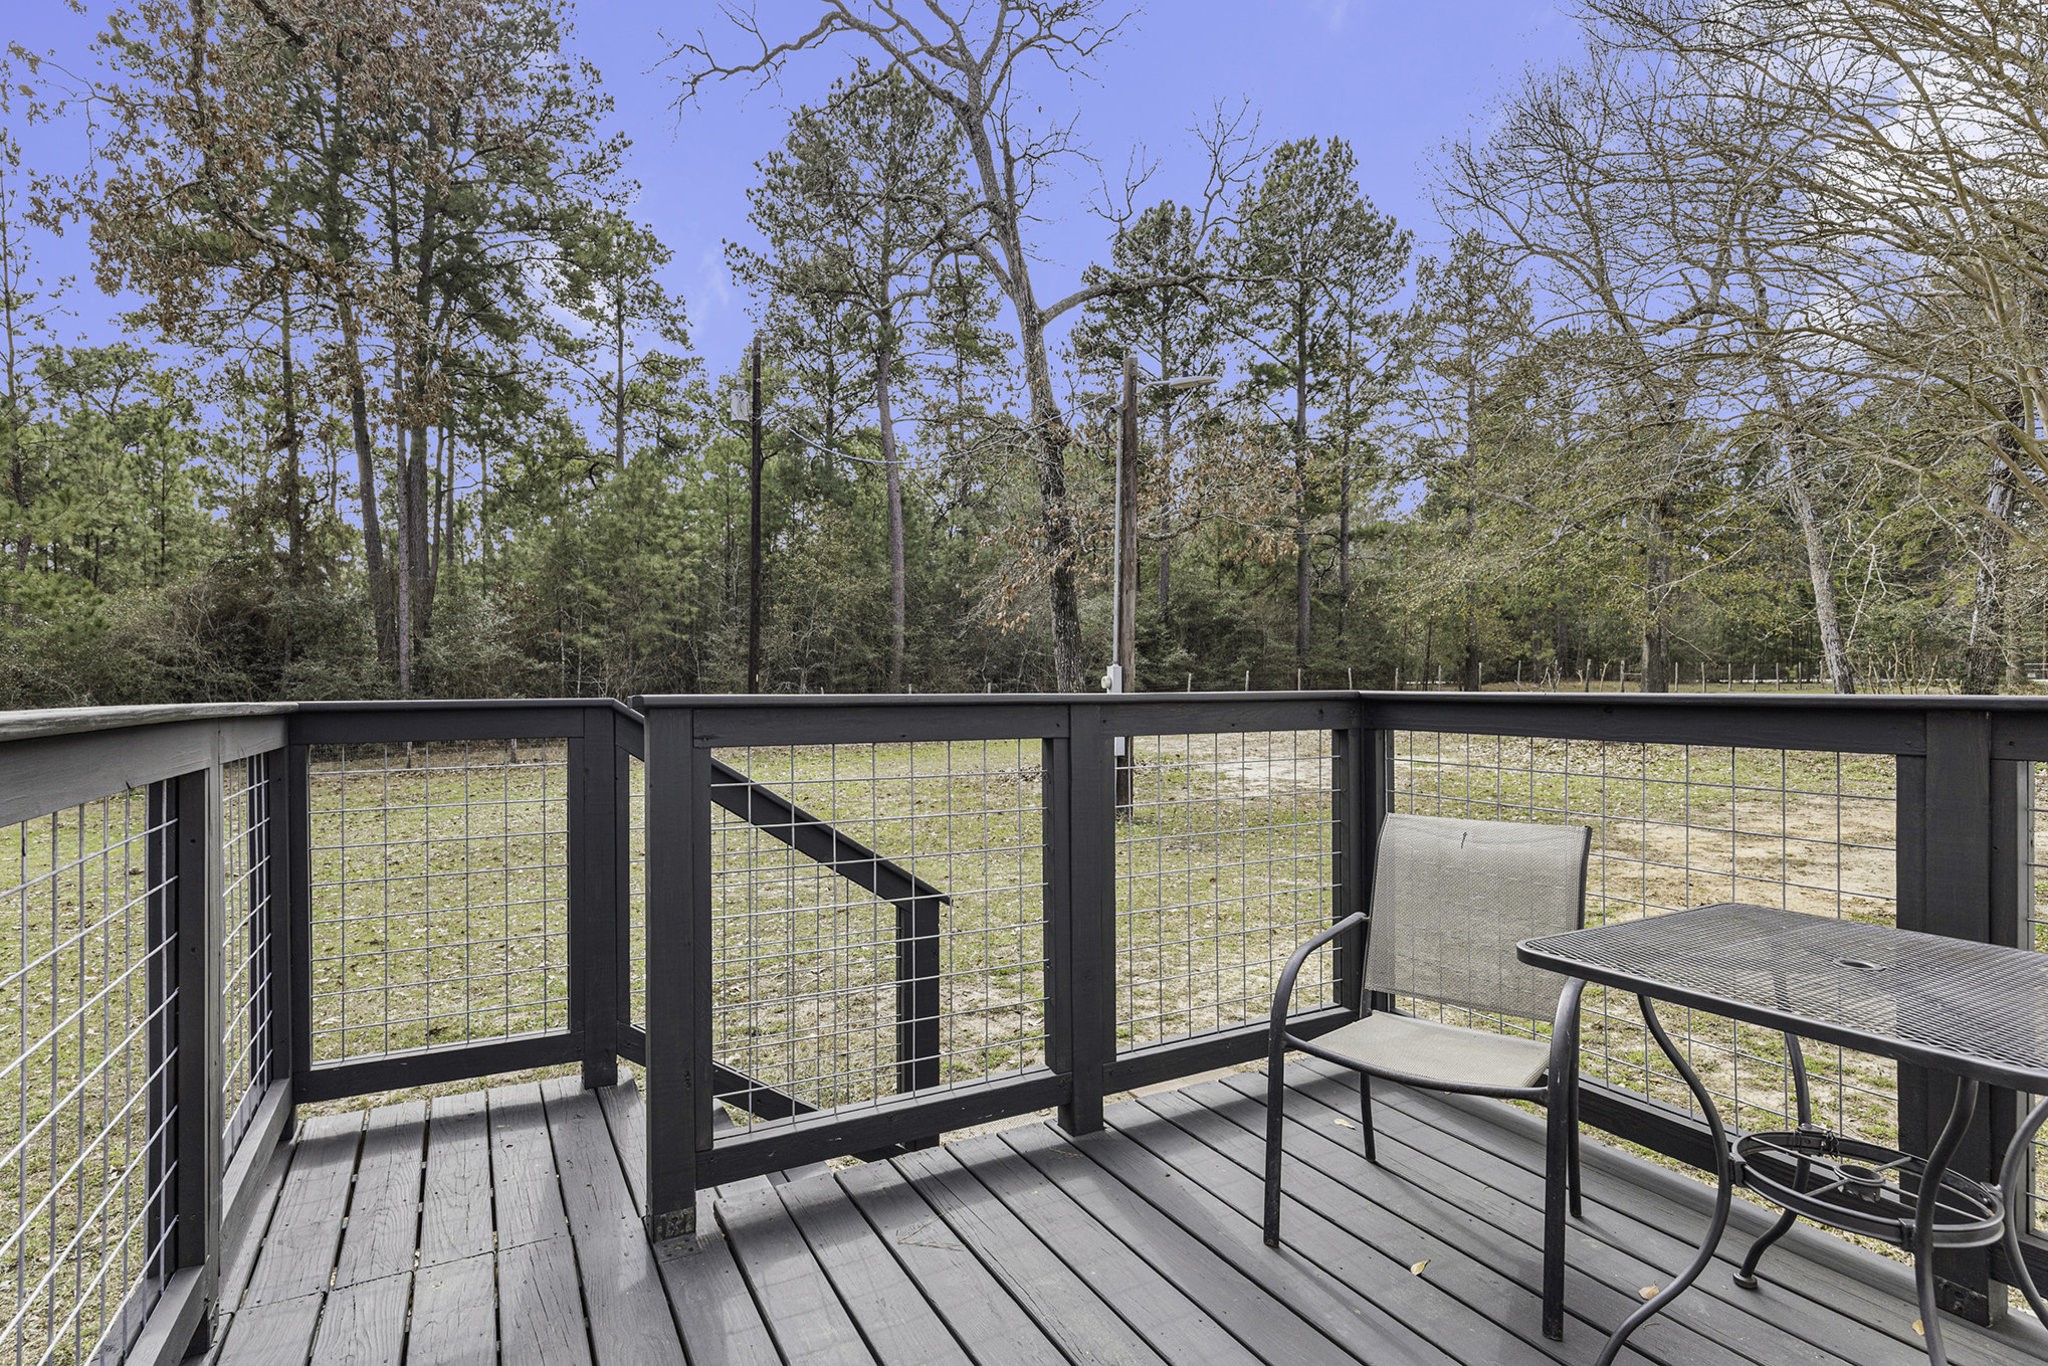 Enjoy the peace and quiet from the side deck.